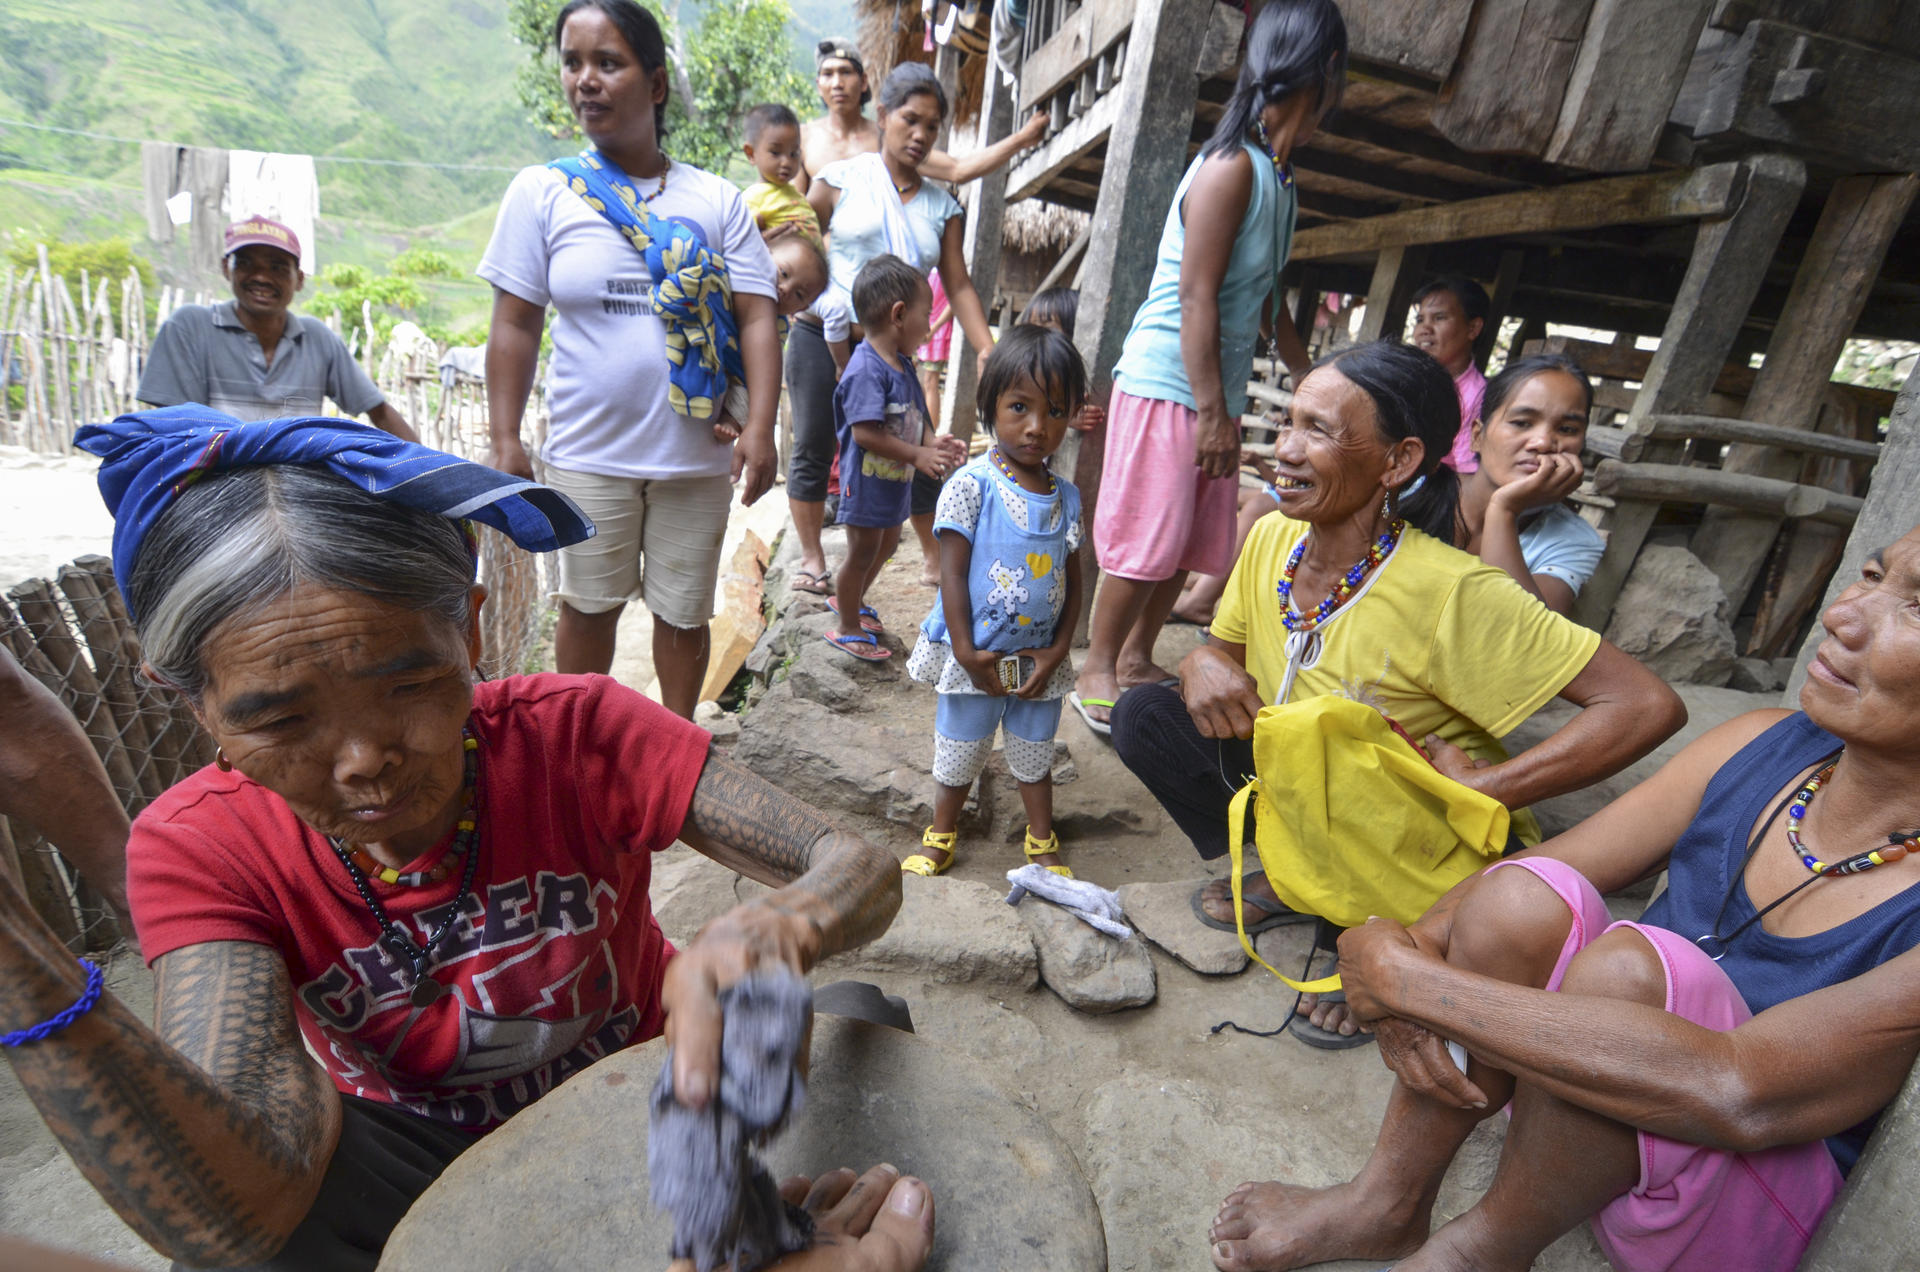 Whang Od is surrounded by villagers in Buscalan as she goes to work on Aya Lowe's foot. Photos: Aya Lowe; Robert Ditcham; Corbis